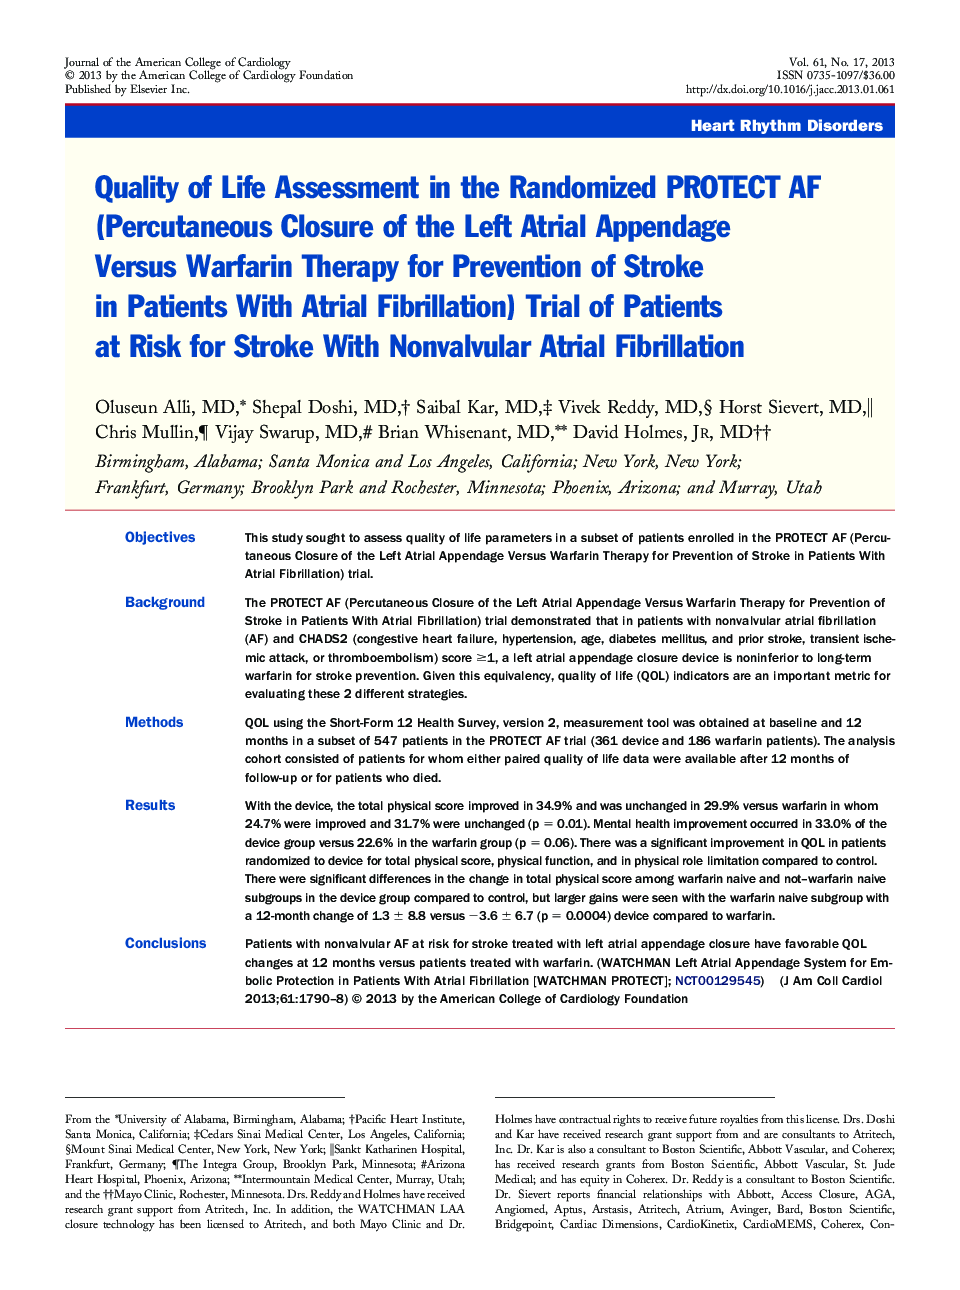 Quality of Life Assessment in the Randomized PROTECT AF (Percutaneous Closure of the Left Atrial Appendage Versus Warfarin Therapy for Prevention of Stroke in Patients With Atrial Fibrillation) Trial of Patients at Risk for Stroke With Nonvalvular Atrial 